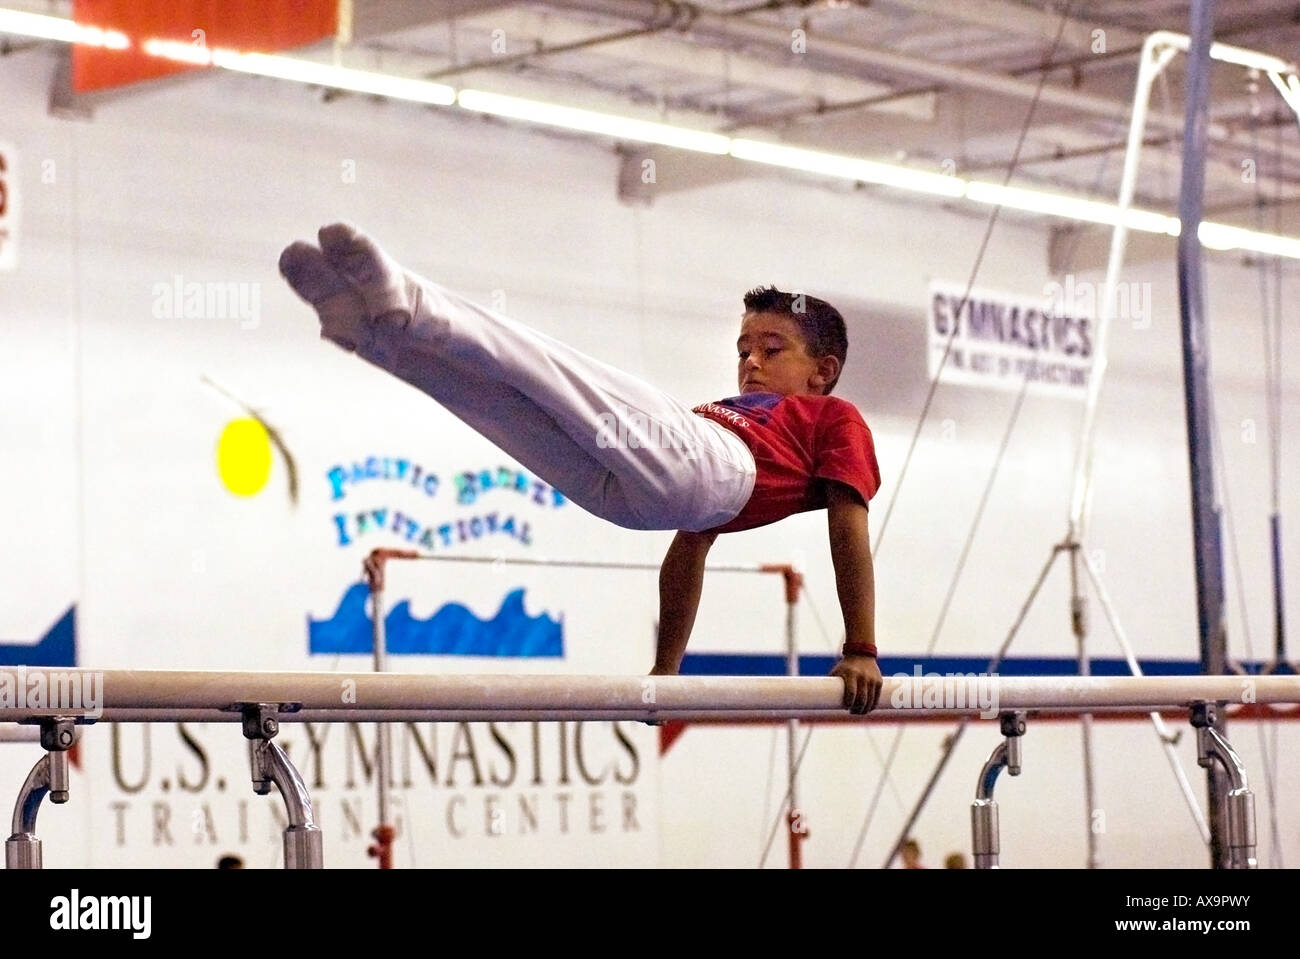 Boy performs on gymnastics parallel bars during demonstration meet at U S Gymnastics Center in California USA Stock Photo